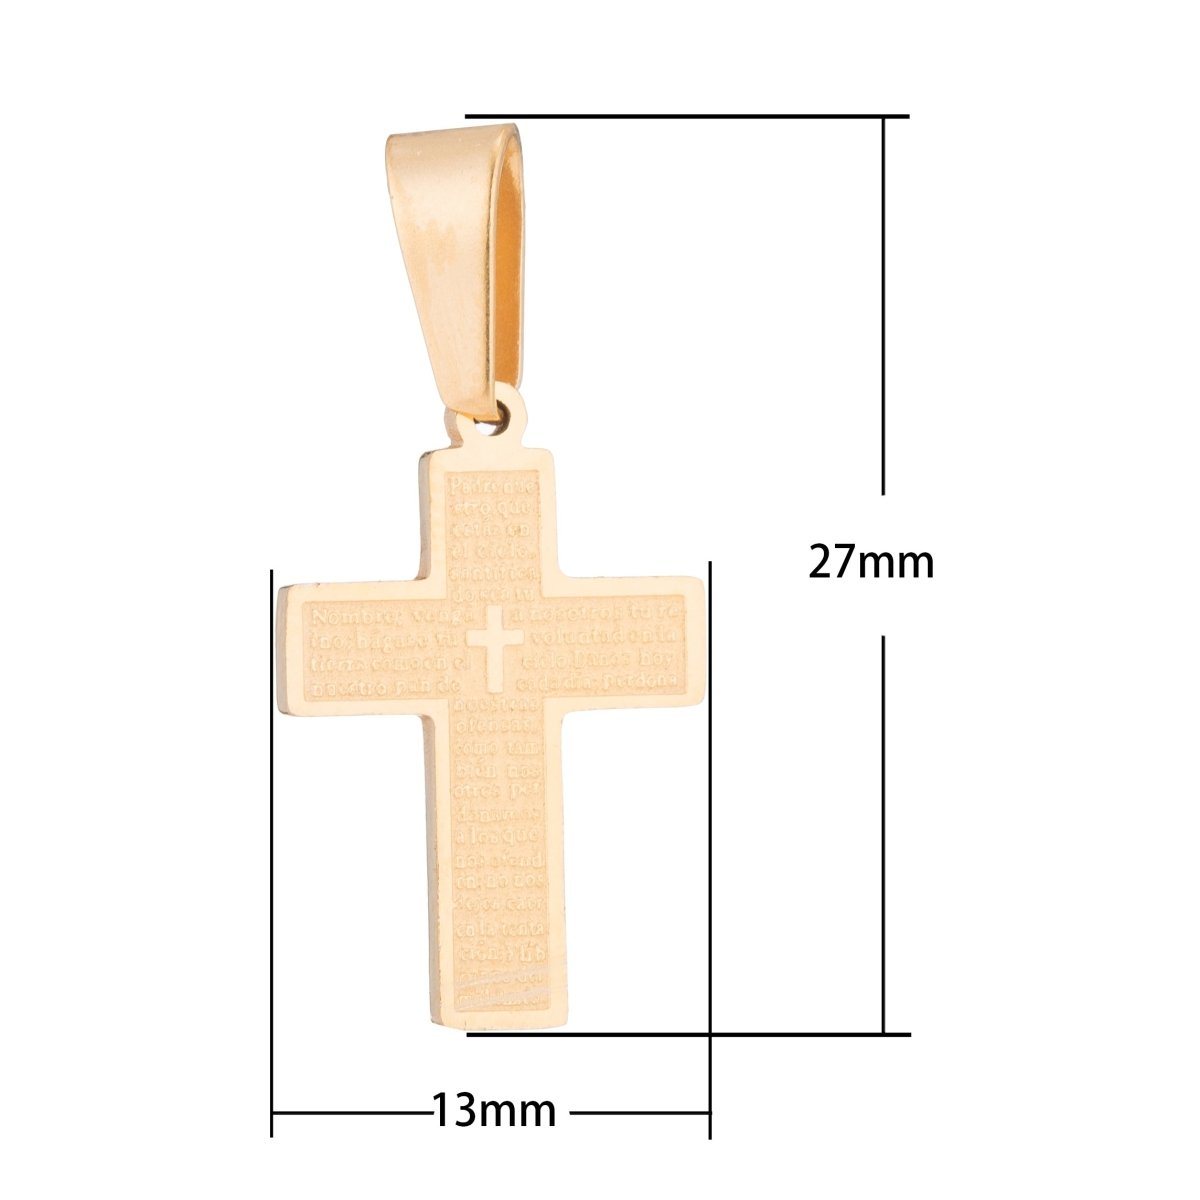 Dainty 24k Gold Filled Spanish Lord's Prayer Charm Cross Pendant for Religious Jewelry Making Supply J-439 - DLUXCA